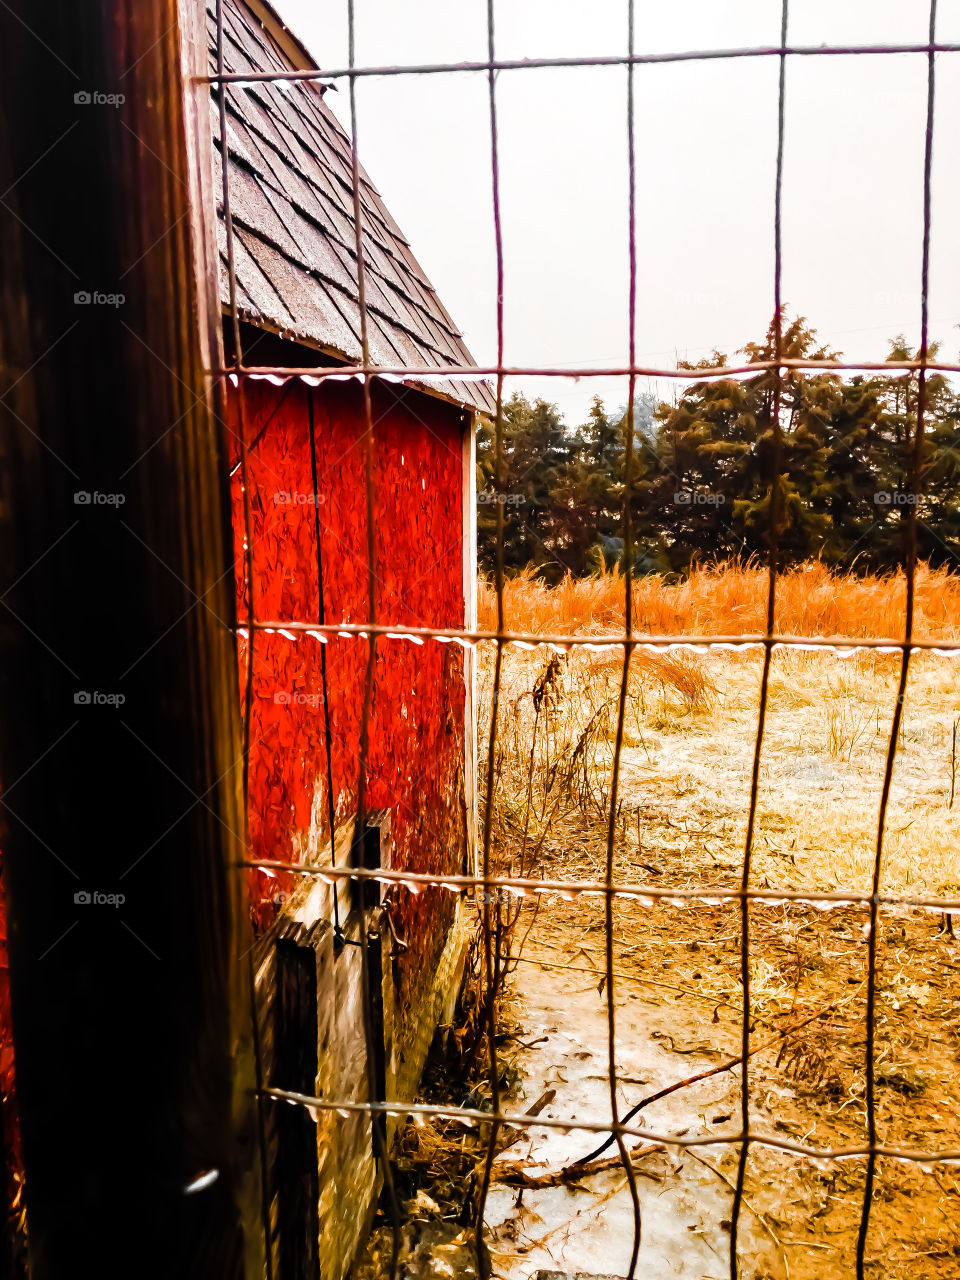 Looking through the fence at a barn in freezing rain